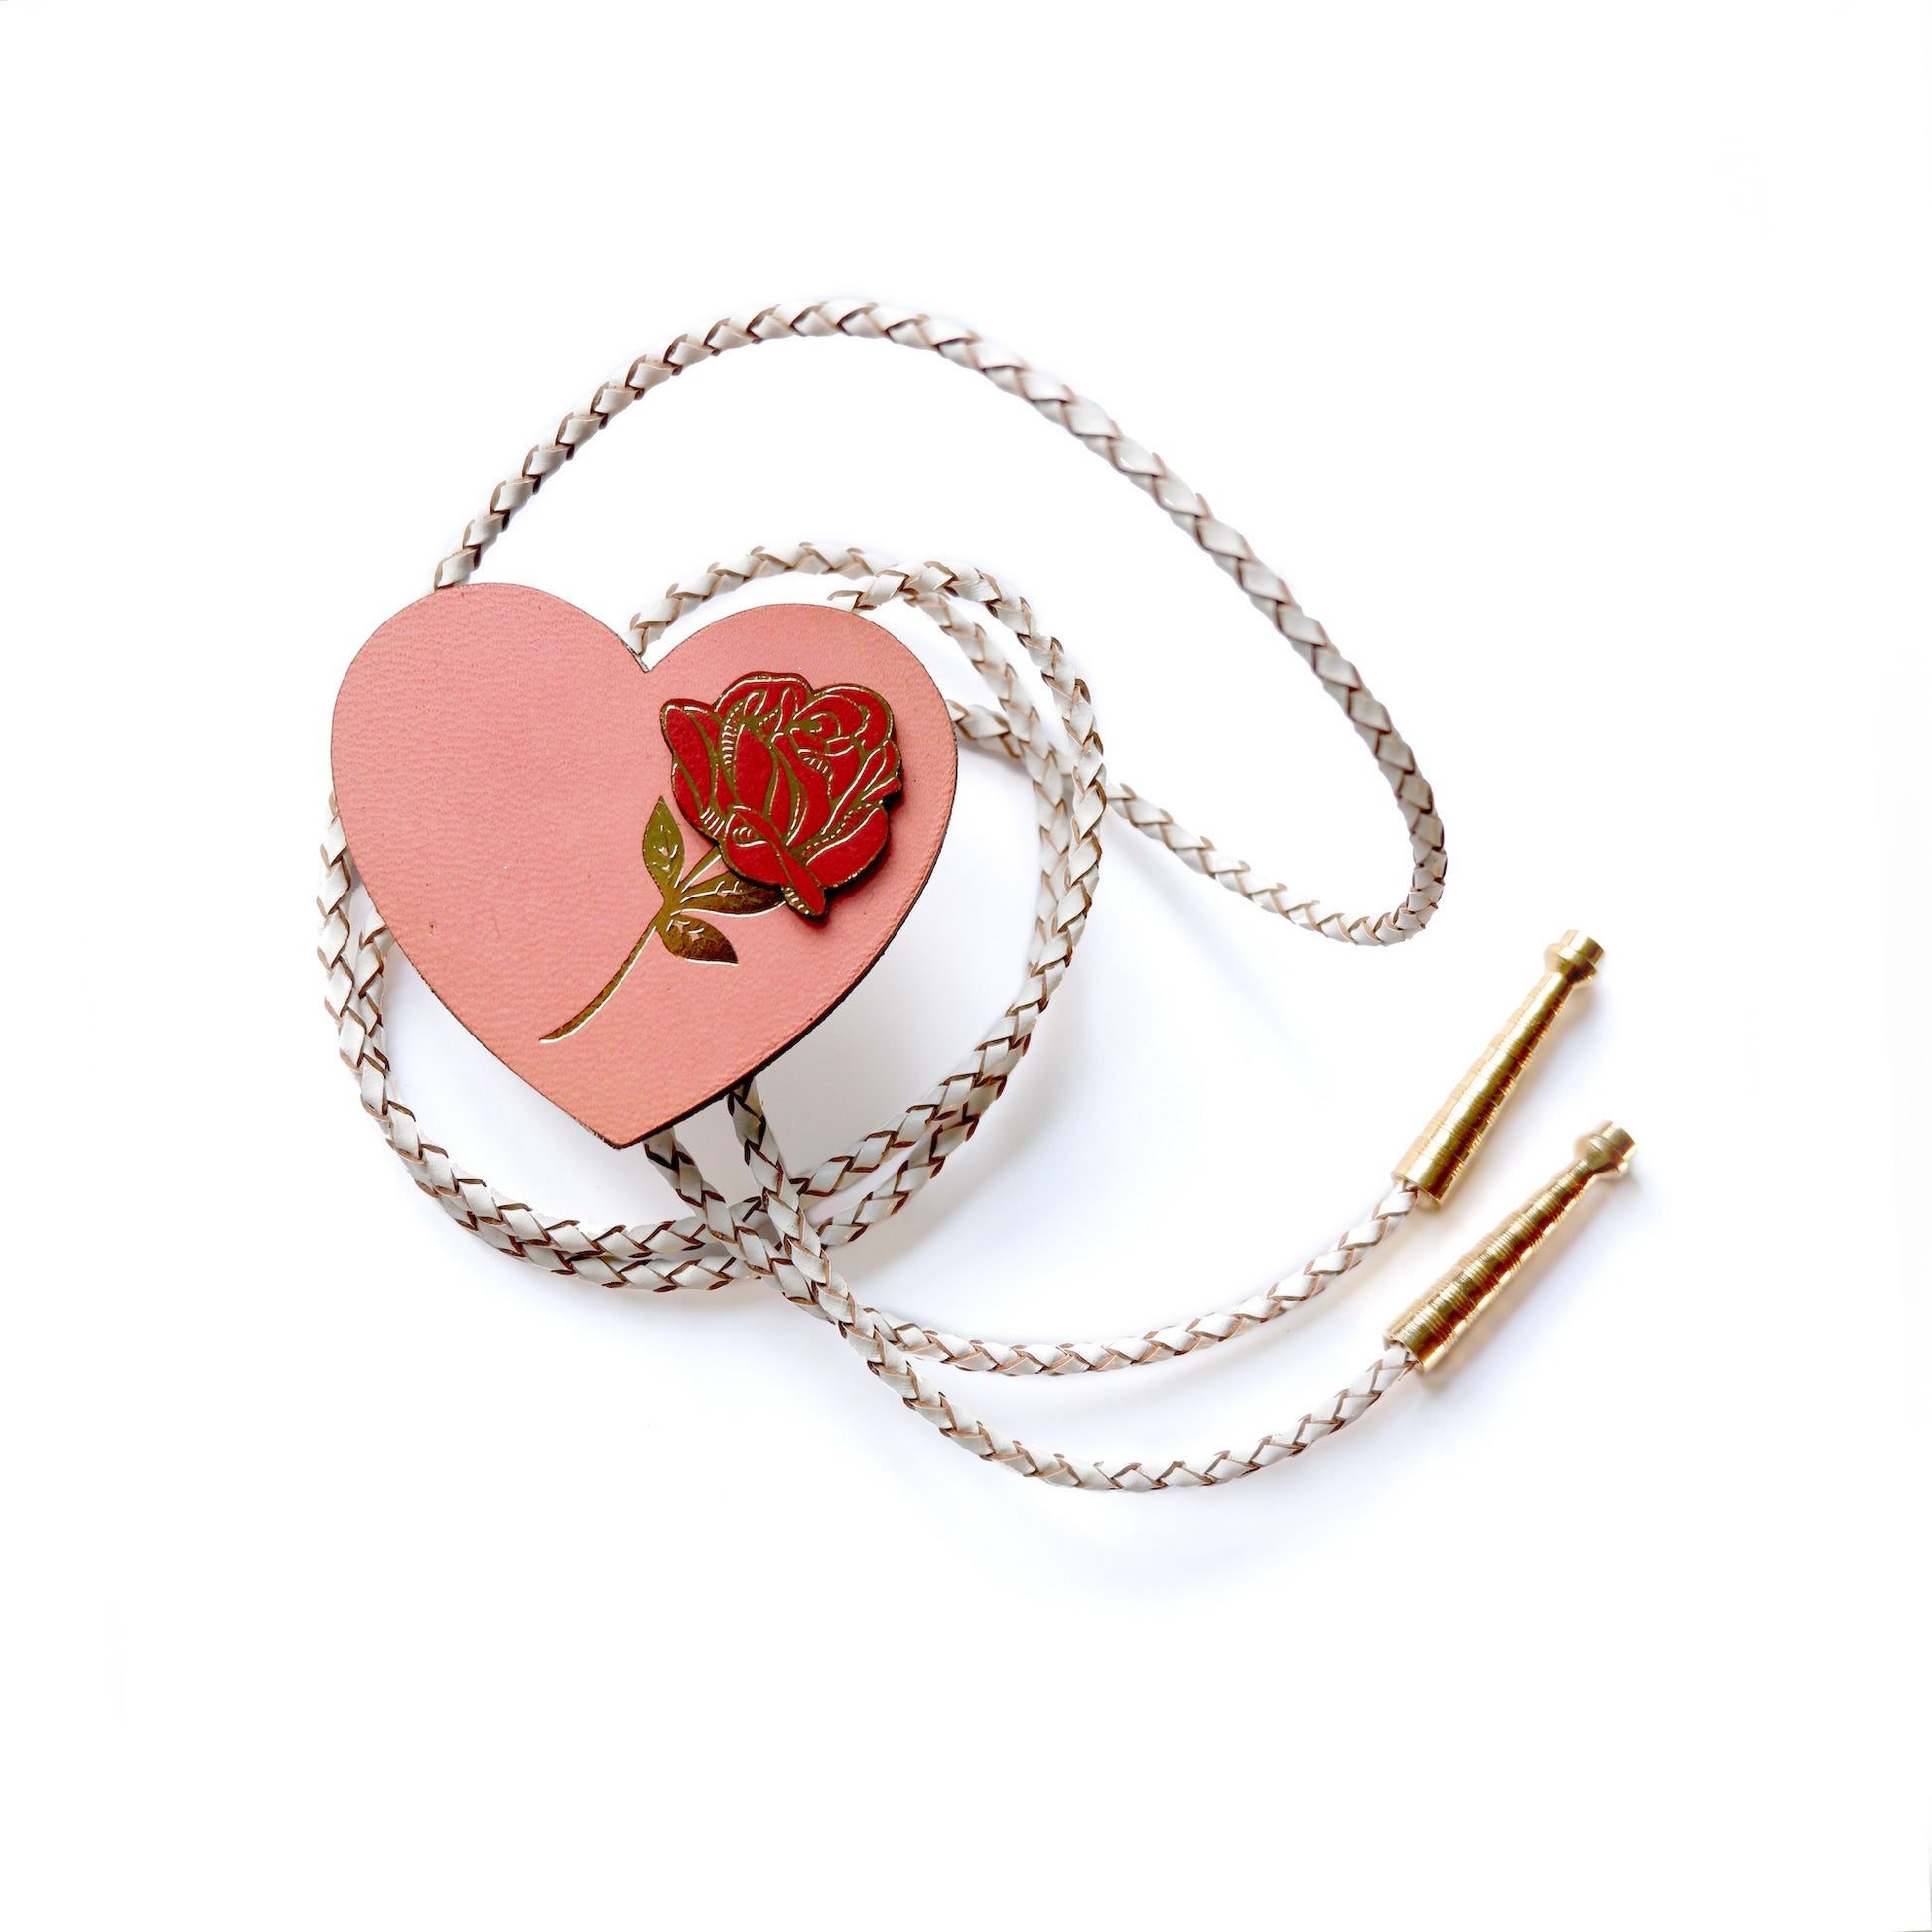 Pink Heart with red rose leather bolo tie with white braided leather cord & golden brass tips